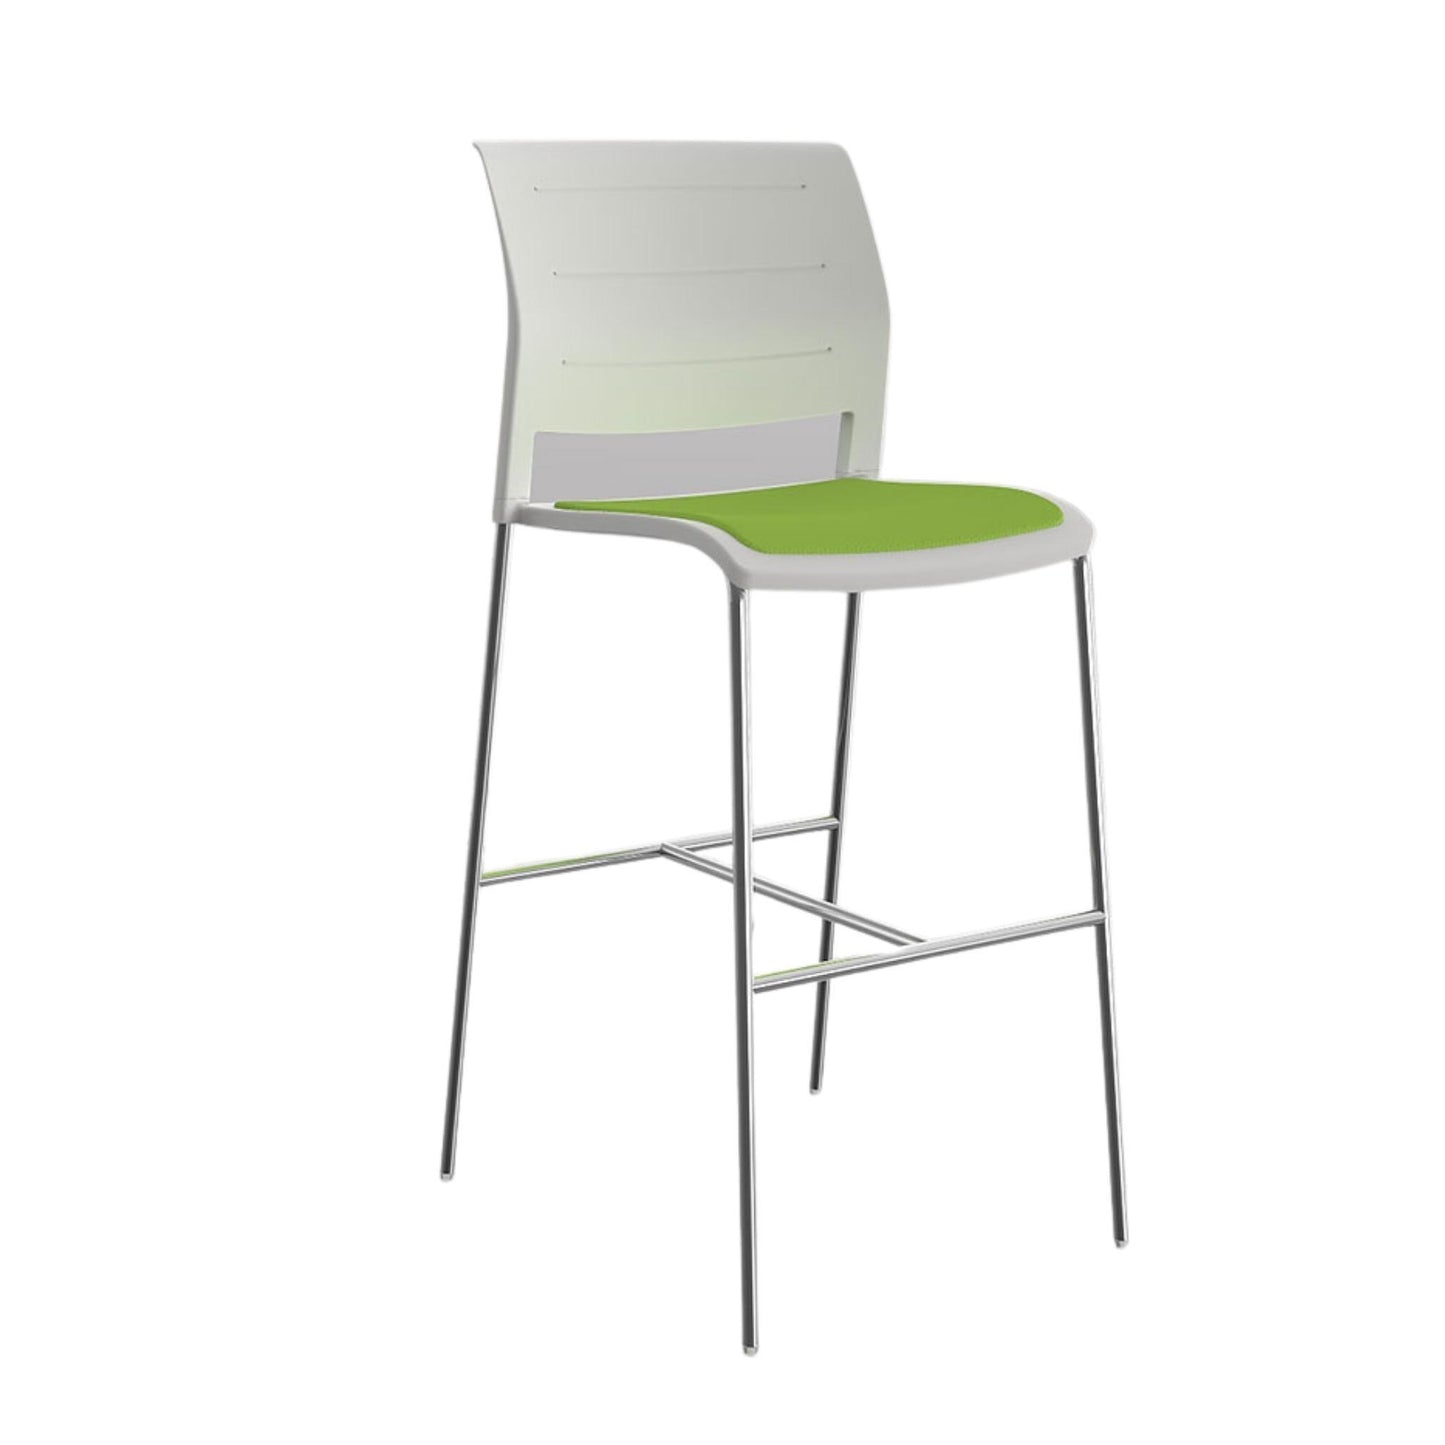 Game Office Bar Stool with Upholstered Seat - Office Furniture Company 